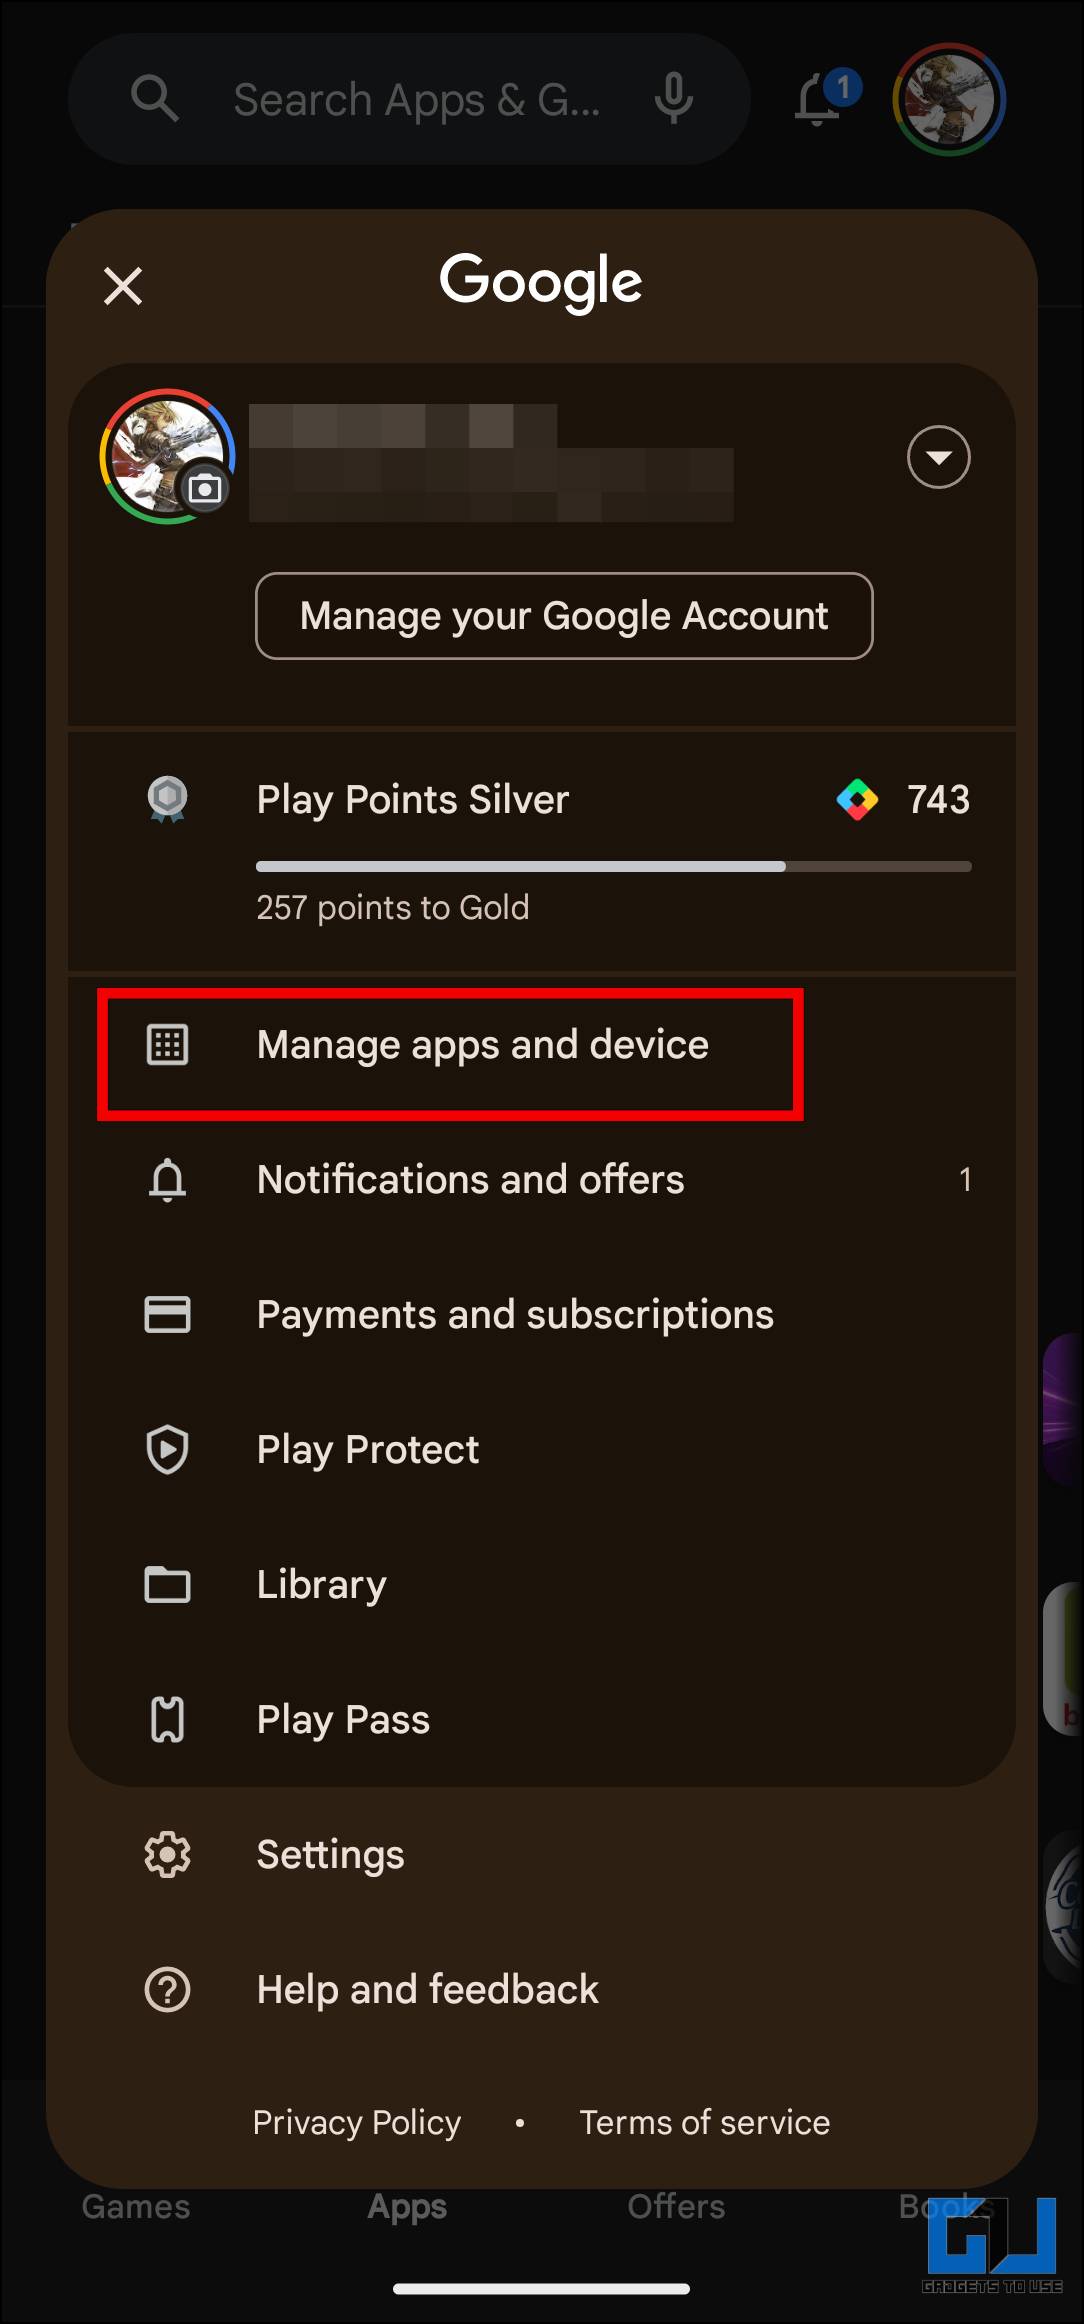 Go to Manage Apps and Devices Section